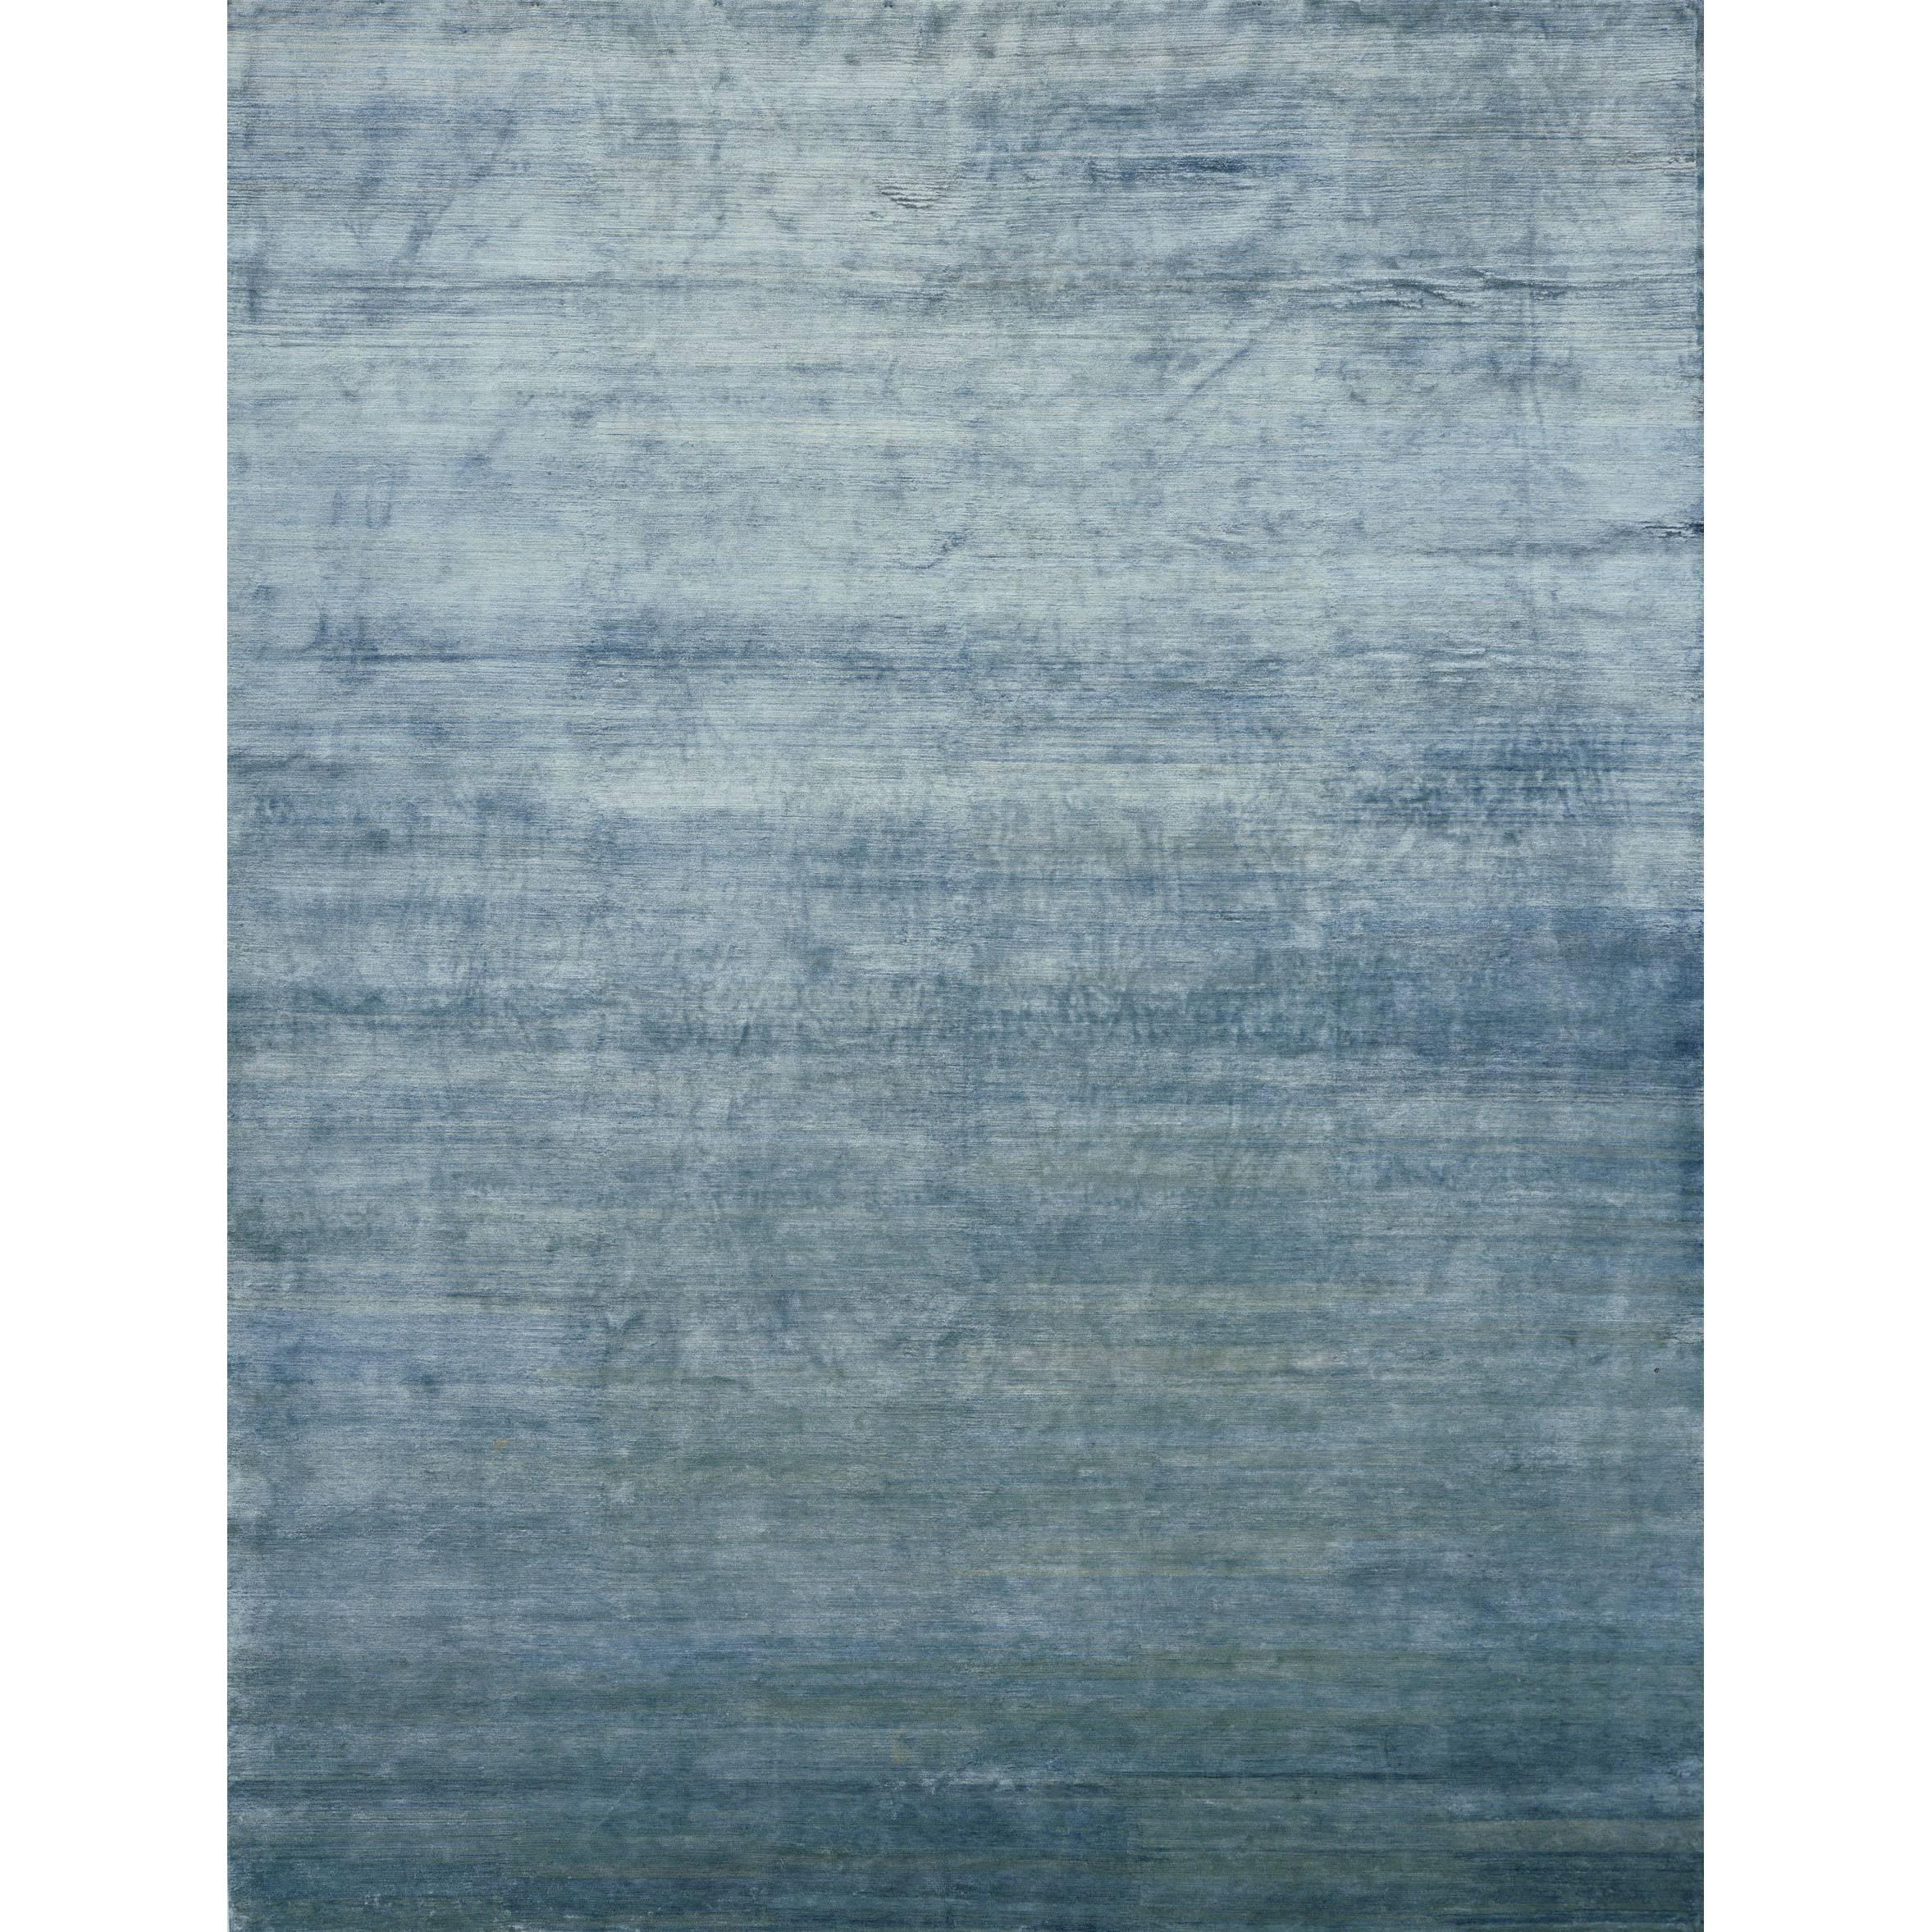 Solid Blue Handmade Area Rug Colored With Natural Indigo Dye 10x14